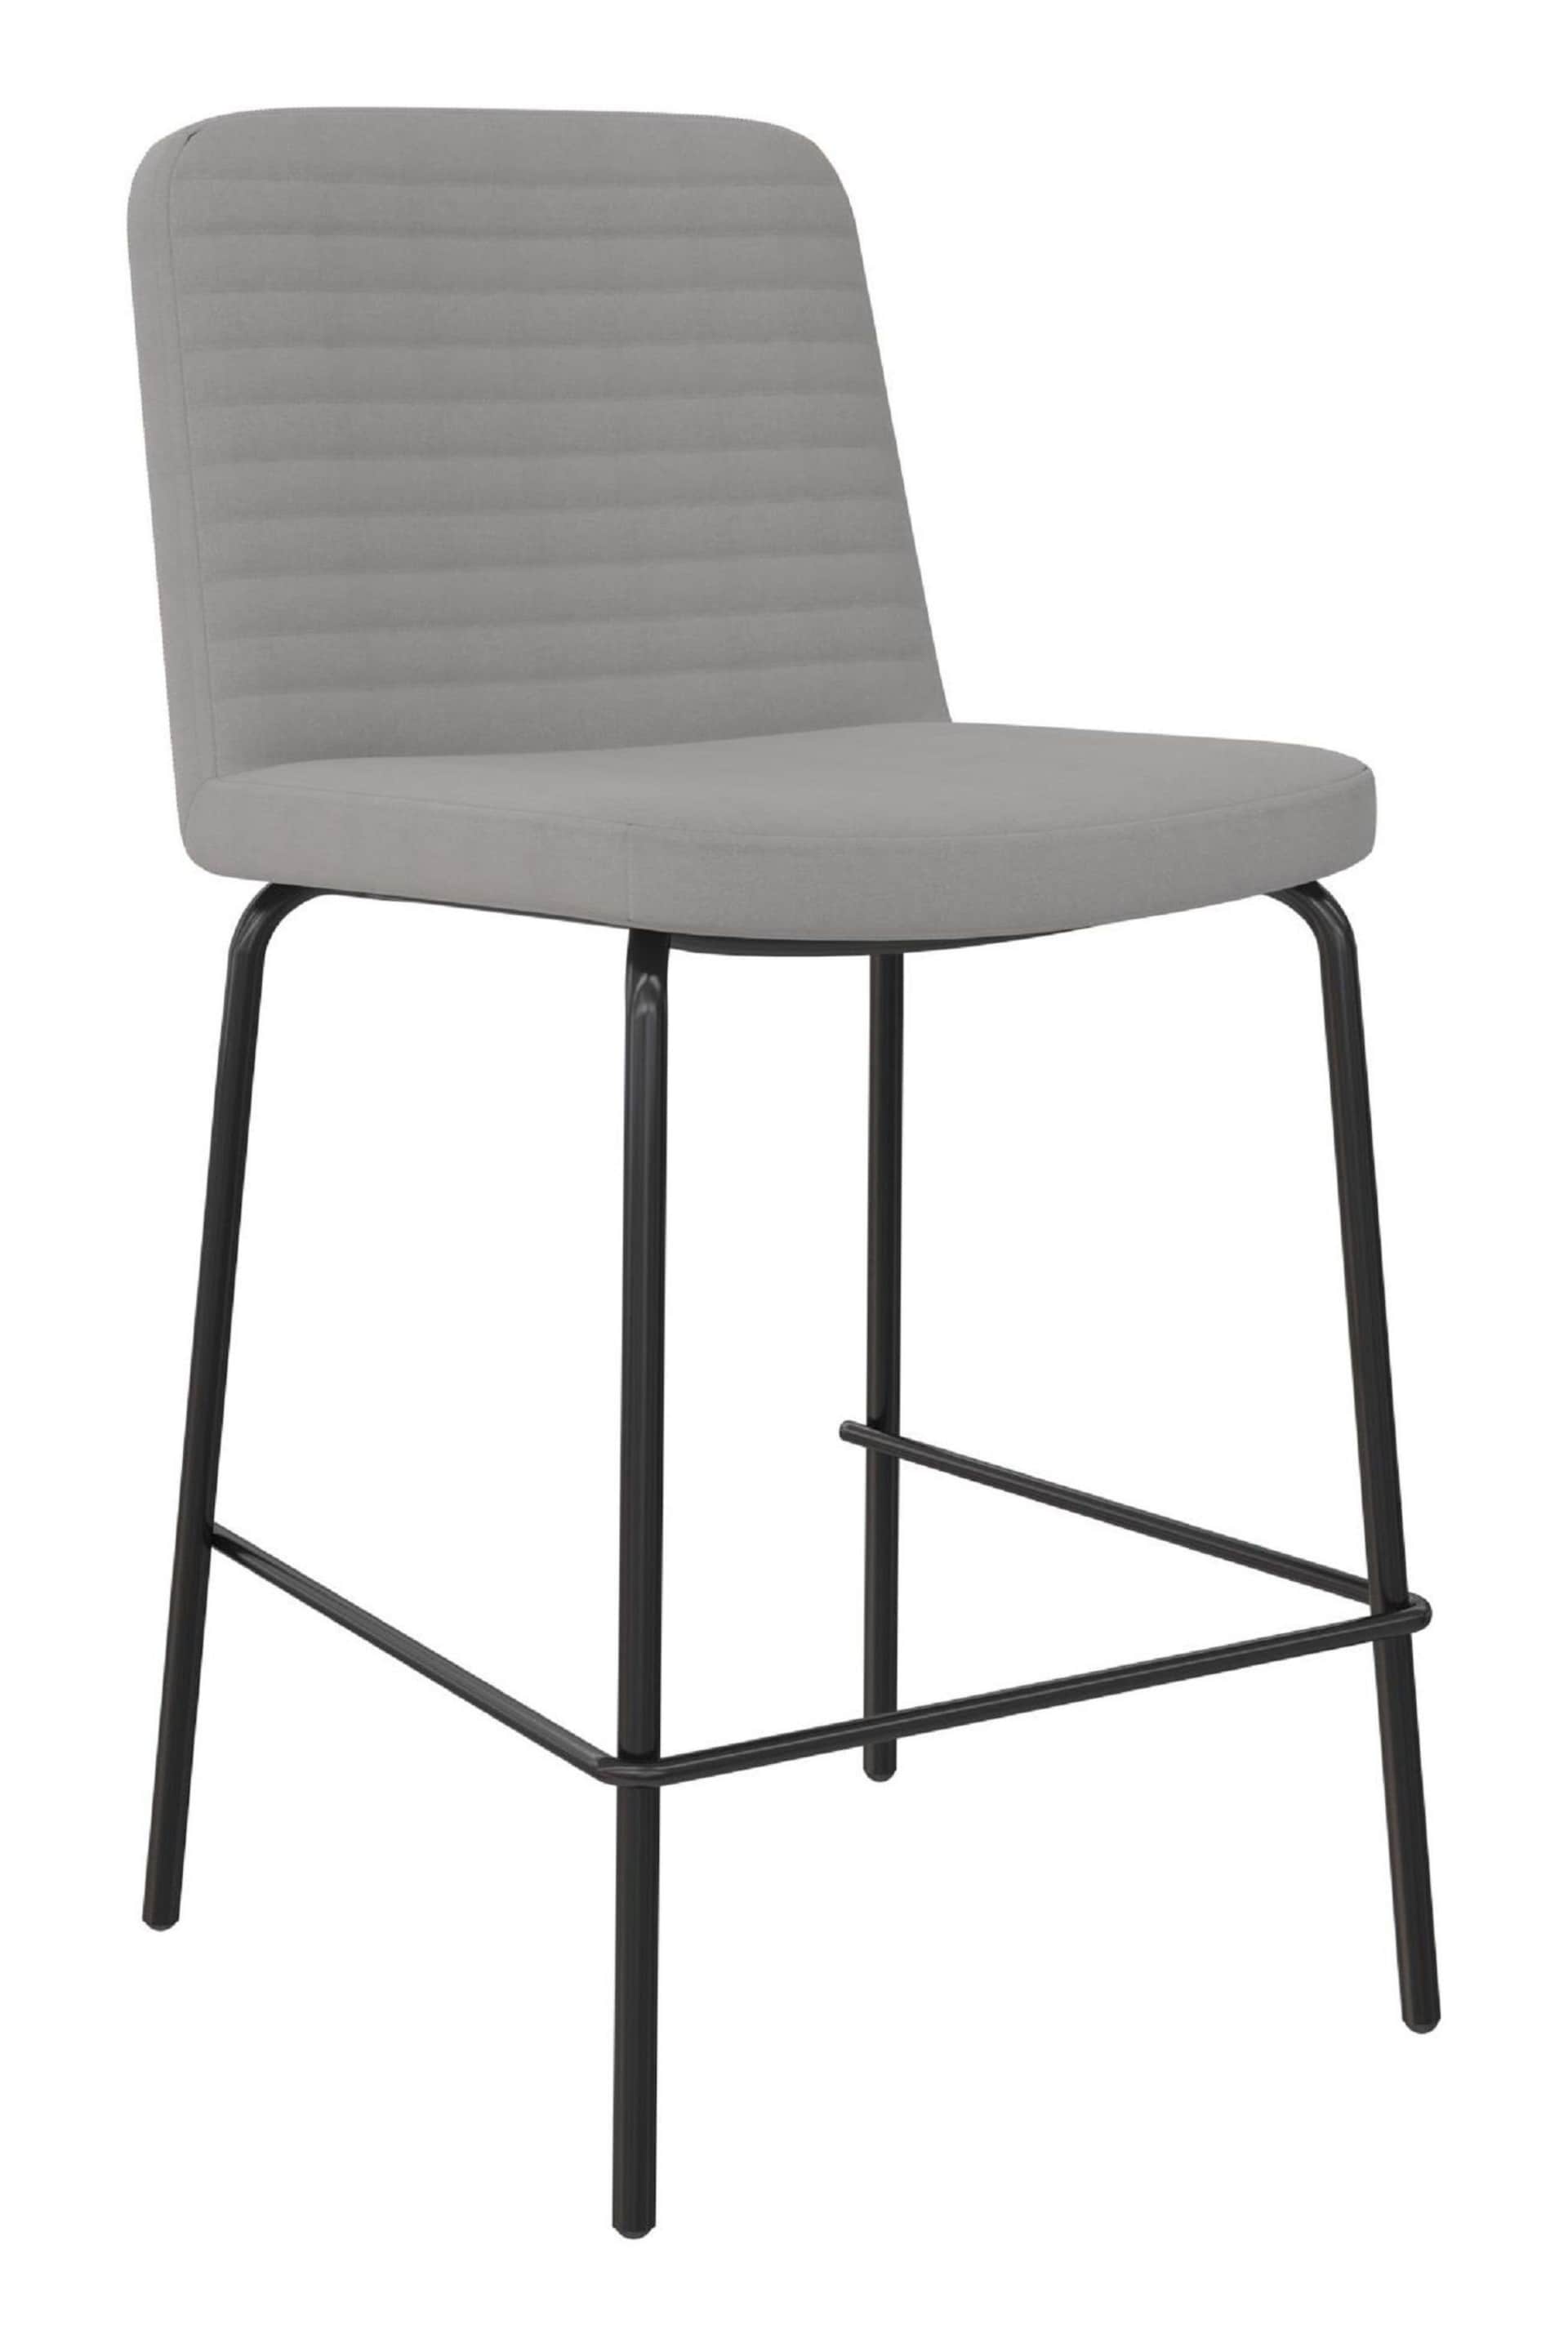 Dorel Home Grey Europe Corey Faux Leather Counter Stool - Image 3 of 4